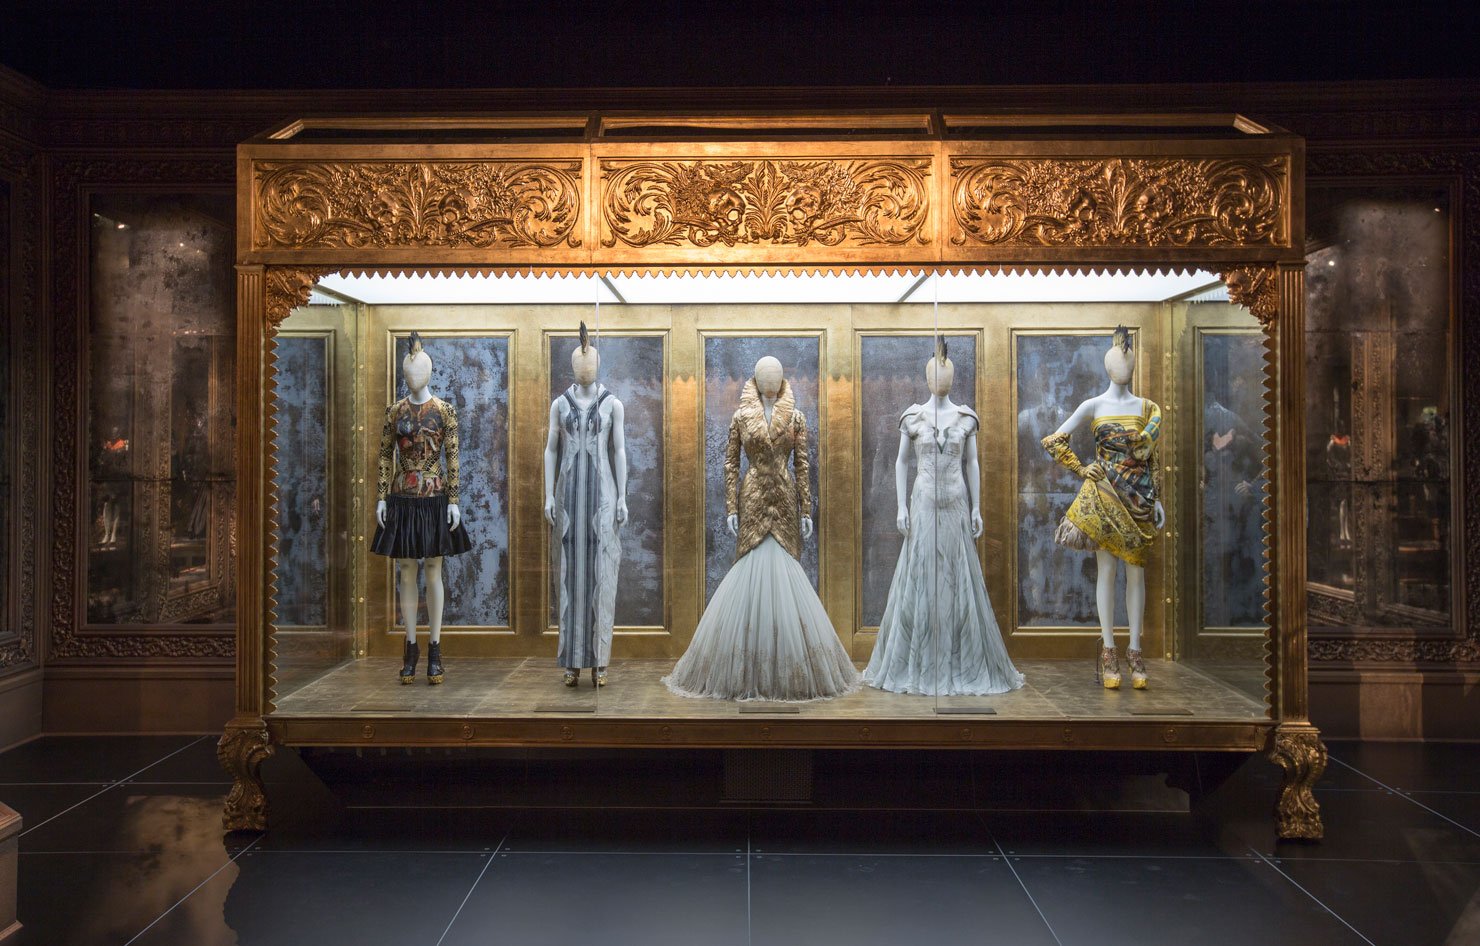 Alexander McQueen Savage Beauty at the V&A. Installation view of 'Romantic Gothic' gallery. Image: Victoria and Albert Museum, London.